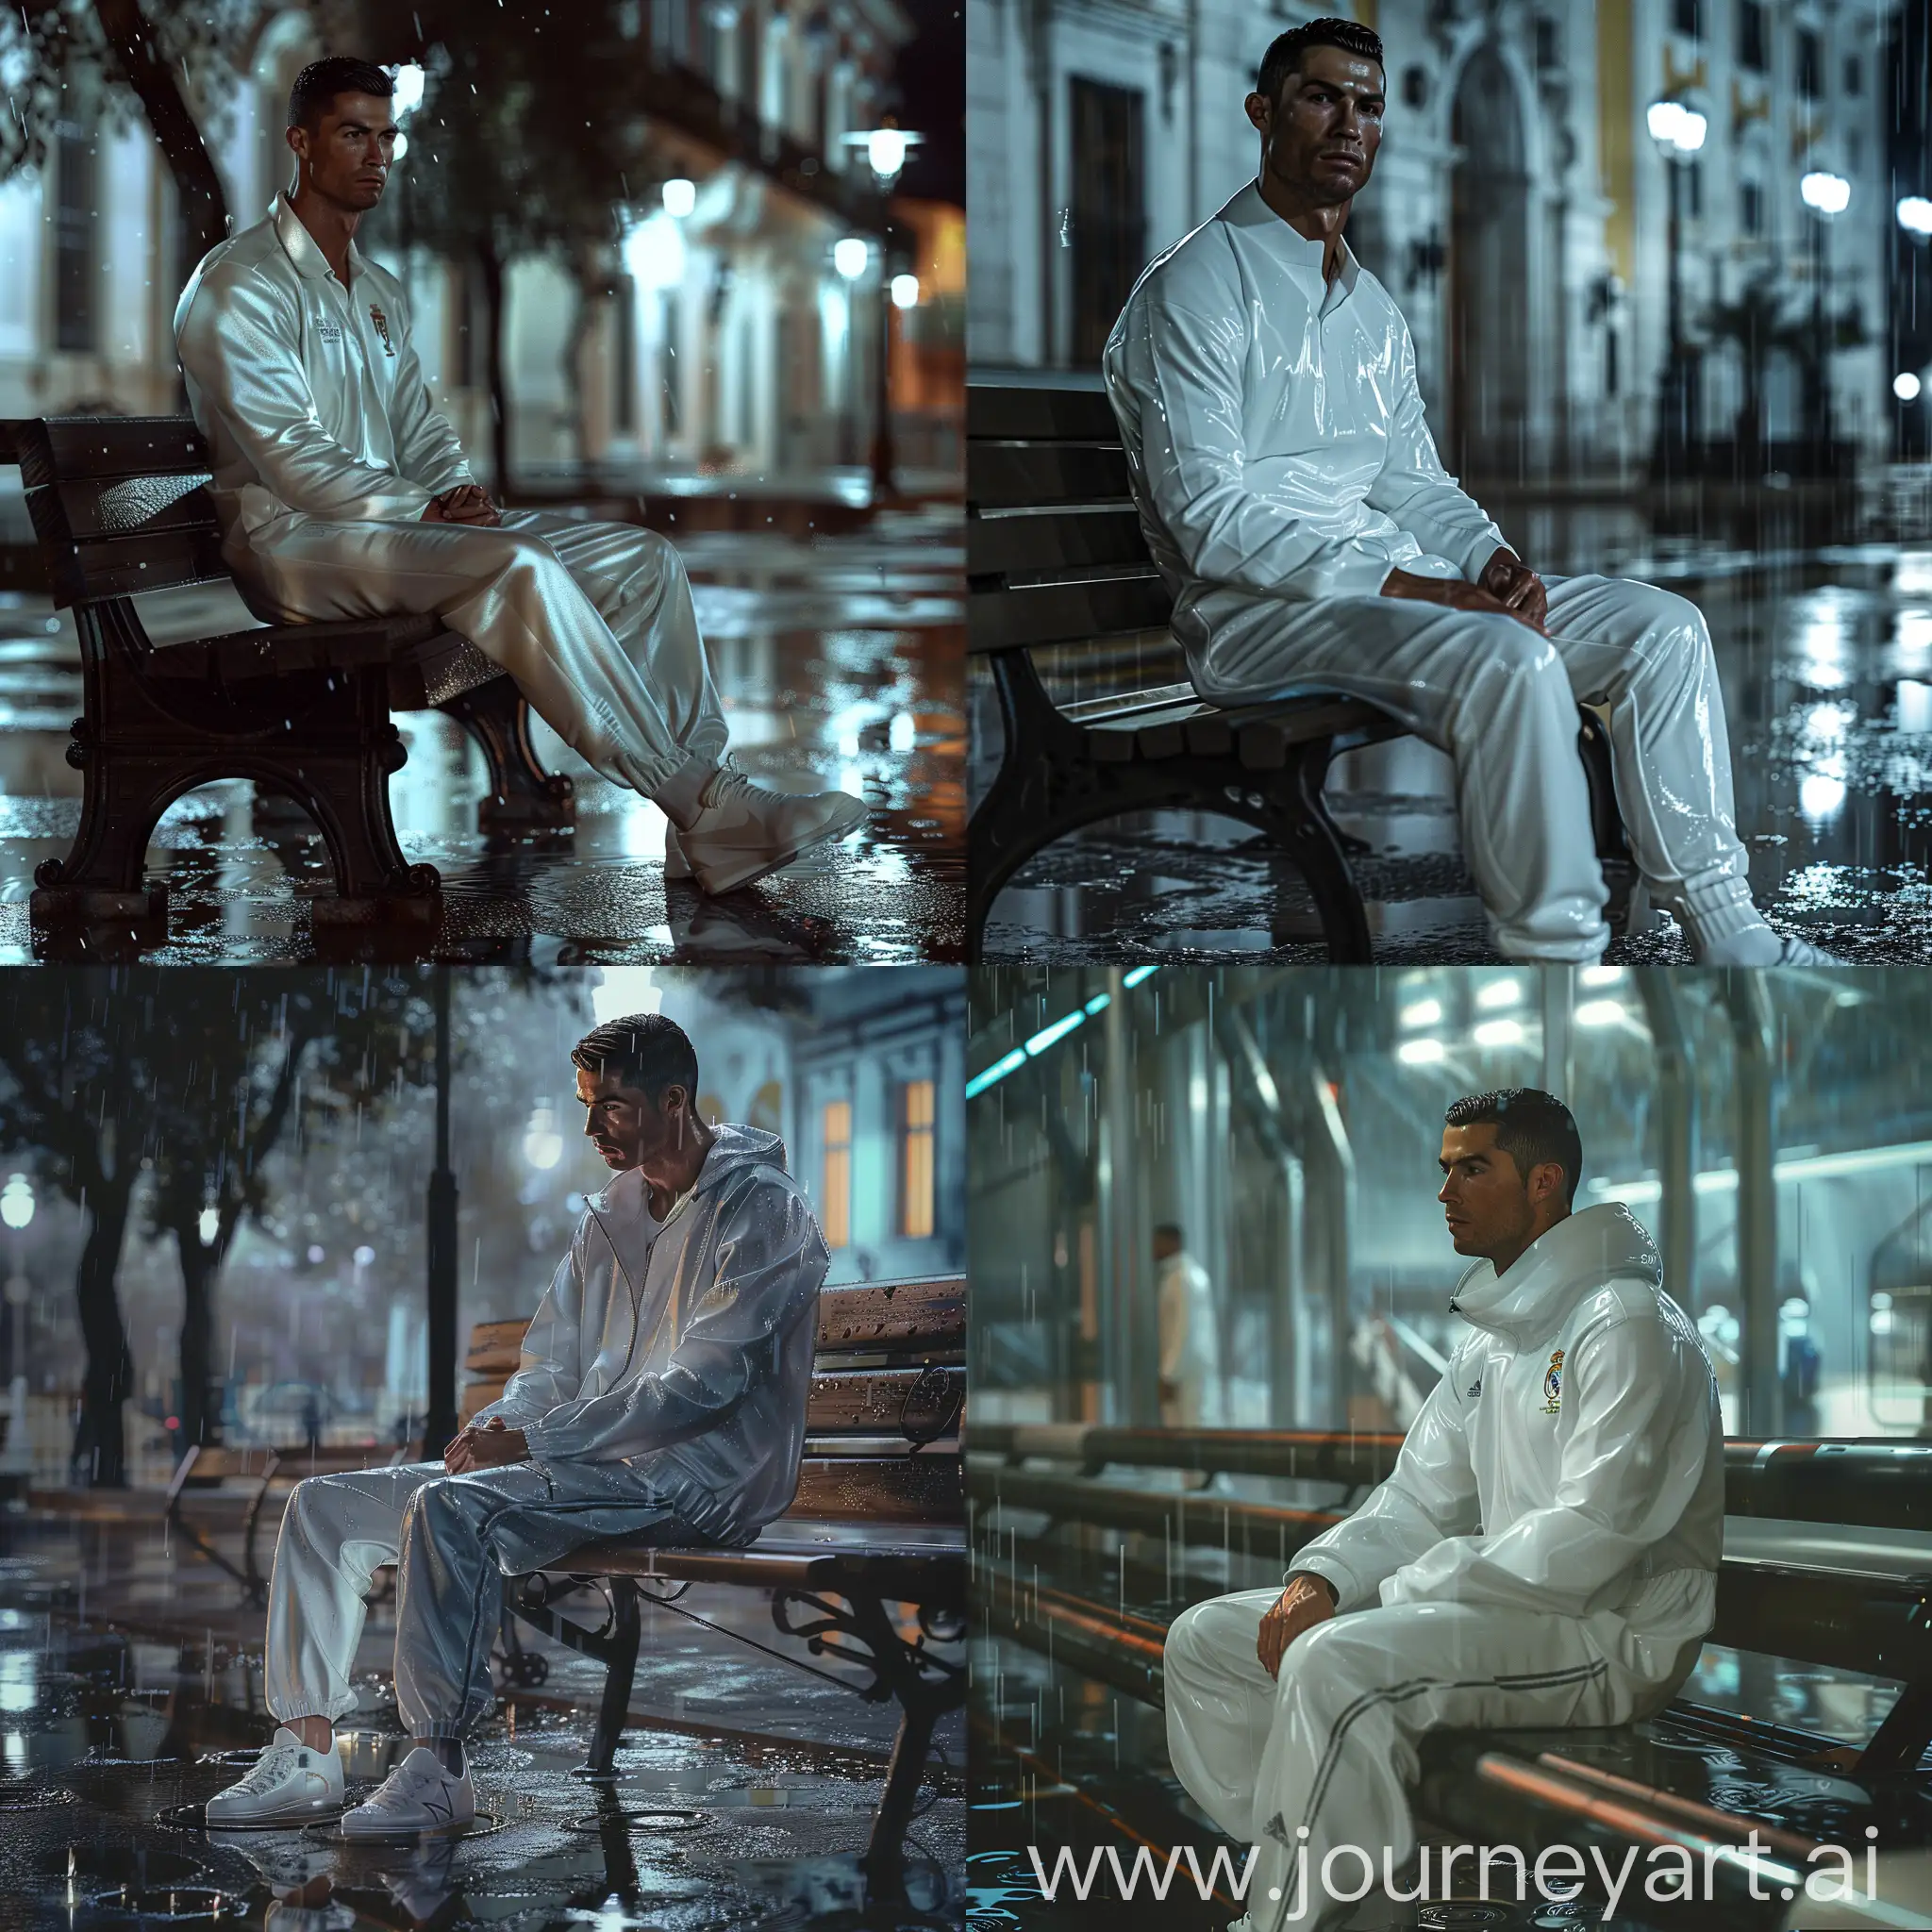 Cristiano-Ronaldo-Relaxing-on-a-Bench-in-Rainy-Weather